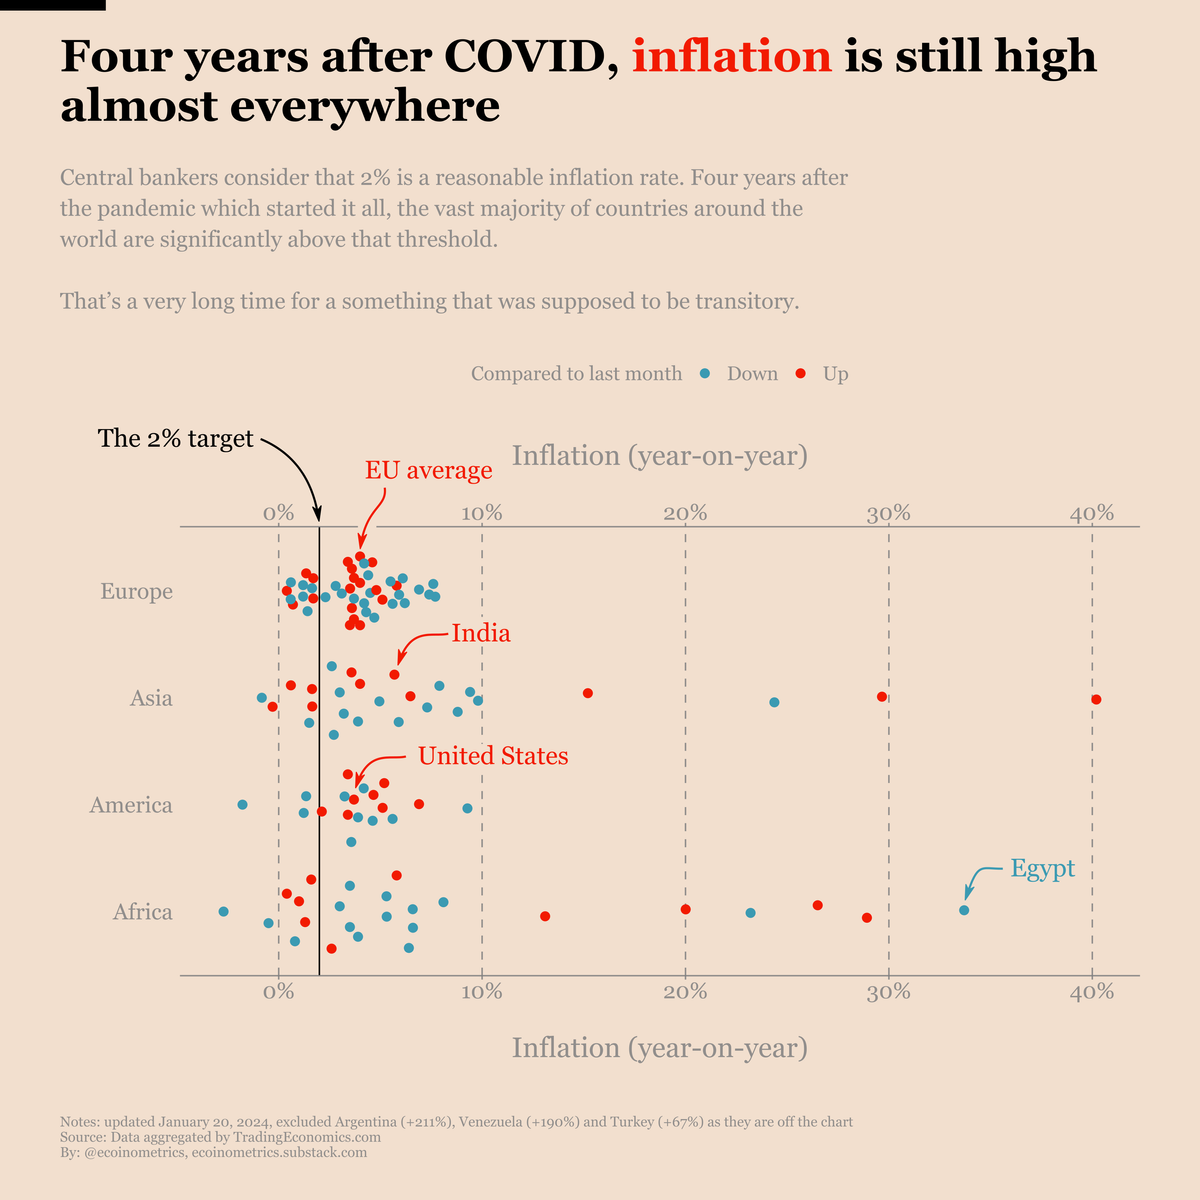 At the beginning of 2024, inflation is high in all countries